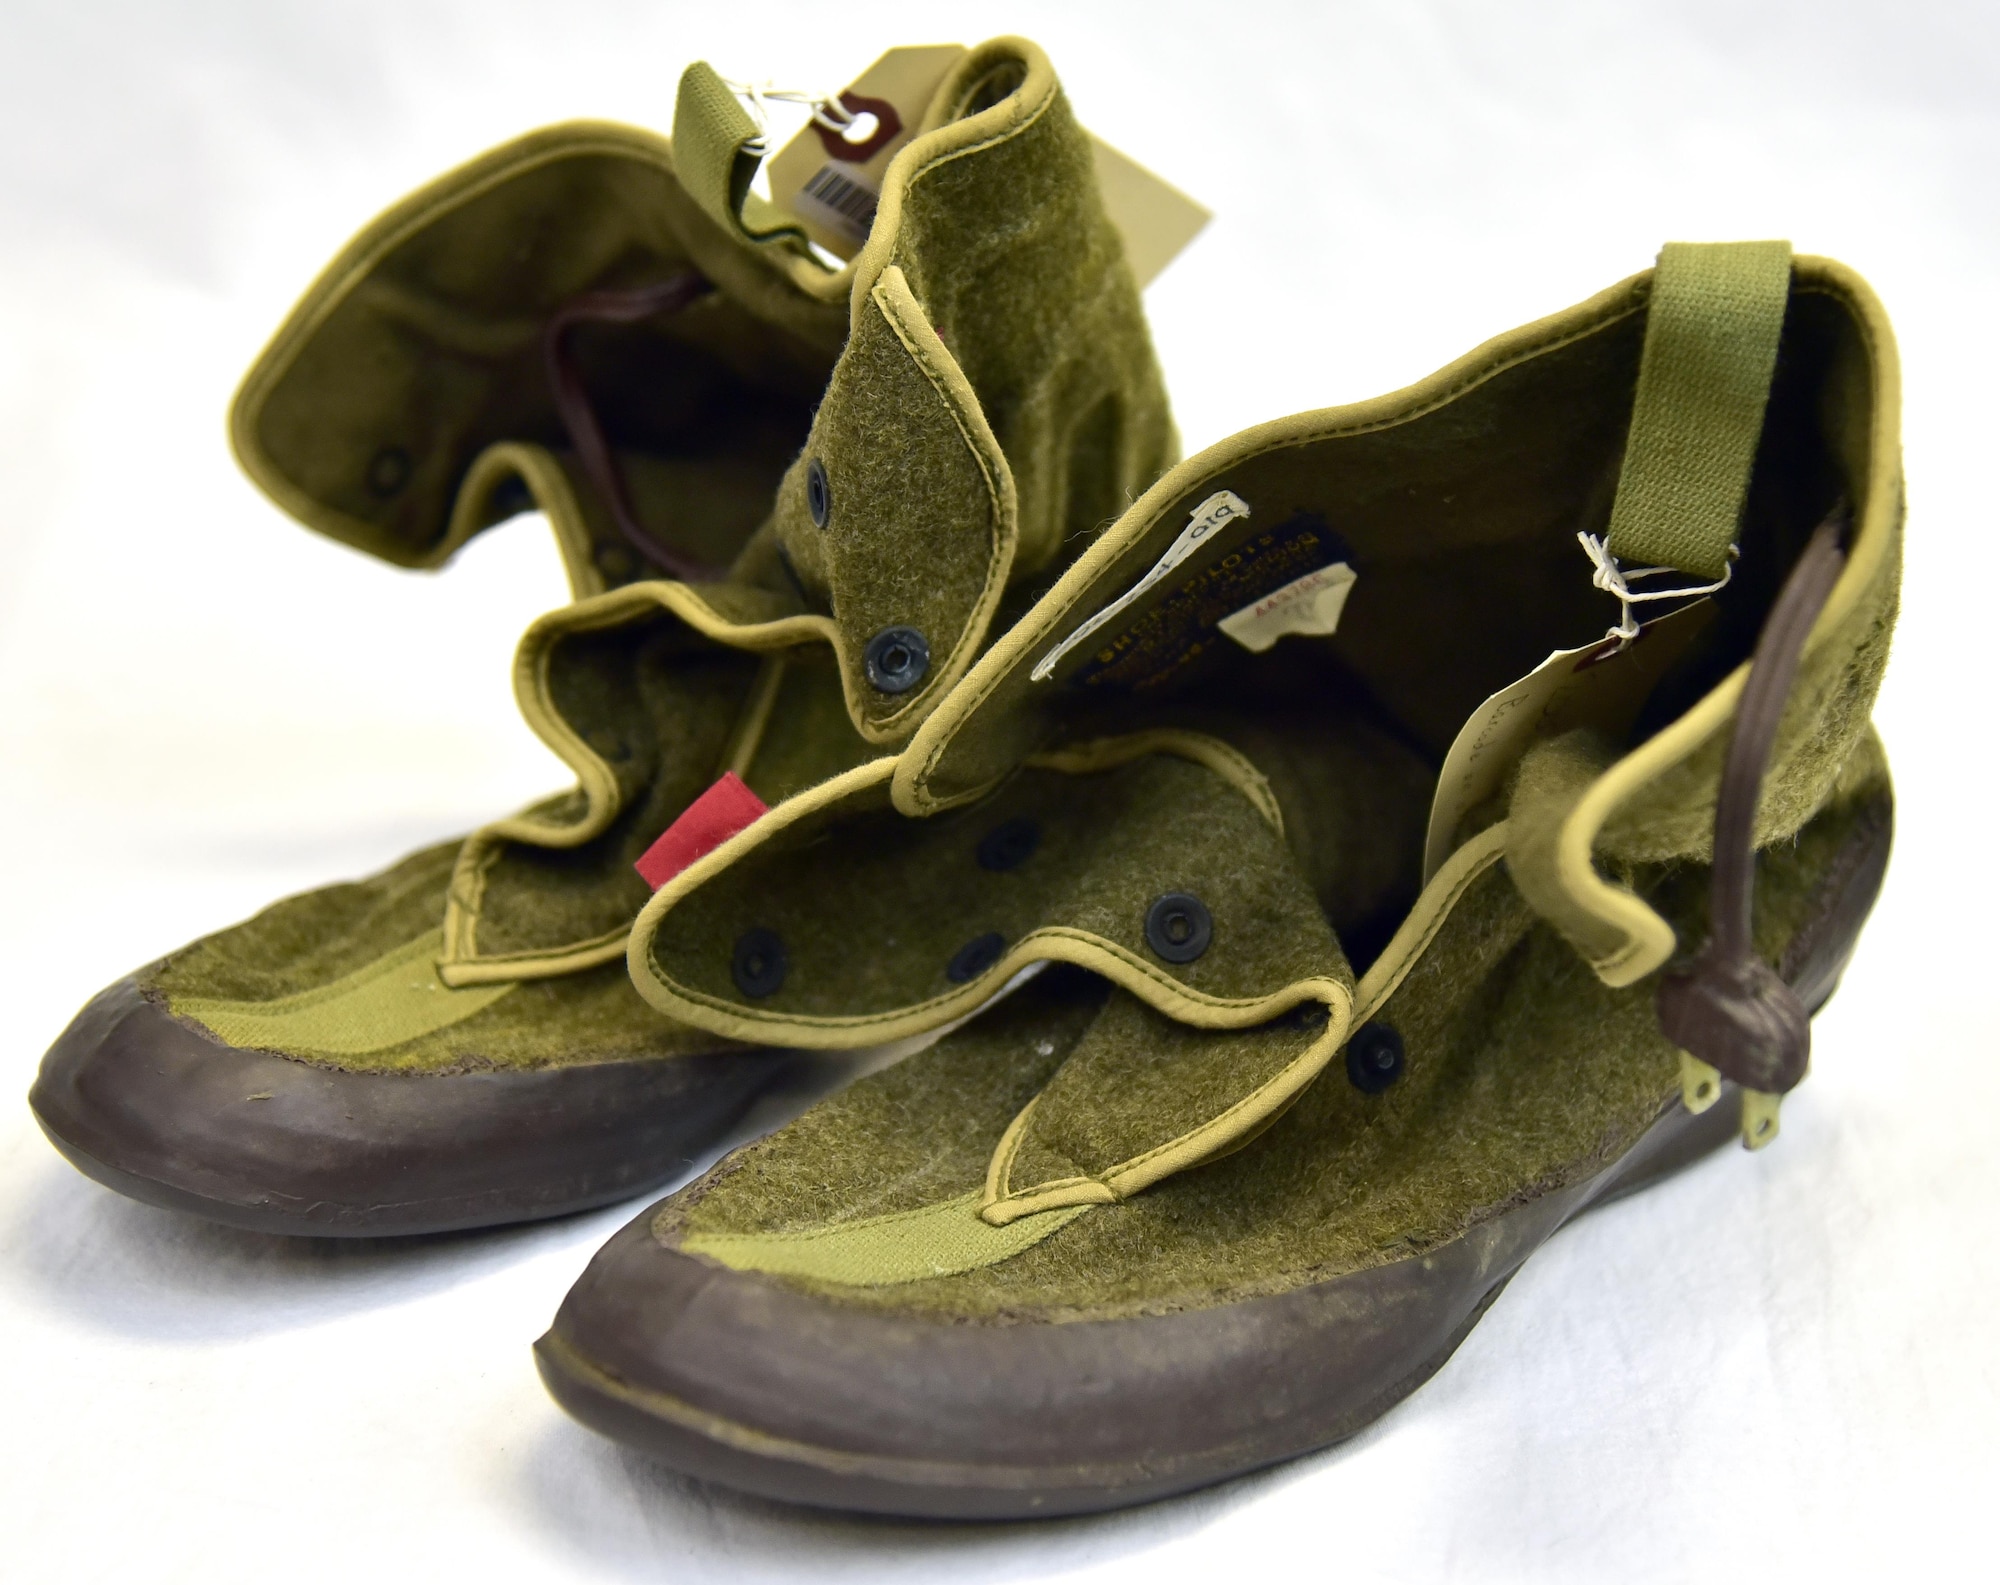 Plans call for this artifact to be displayed near the B-17F Memphis Belle™ as part of the new strategic bombardment exhibit in the WWII Gallery, which opens to the public on May 17, 2018. Electrically-heated shoe inserts used to combat the bitter cold, which dropped to as low as -50°F at high altitude (20-30,000 feet).